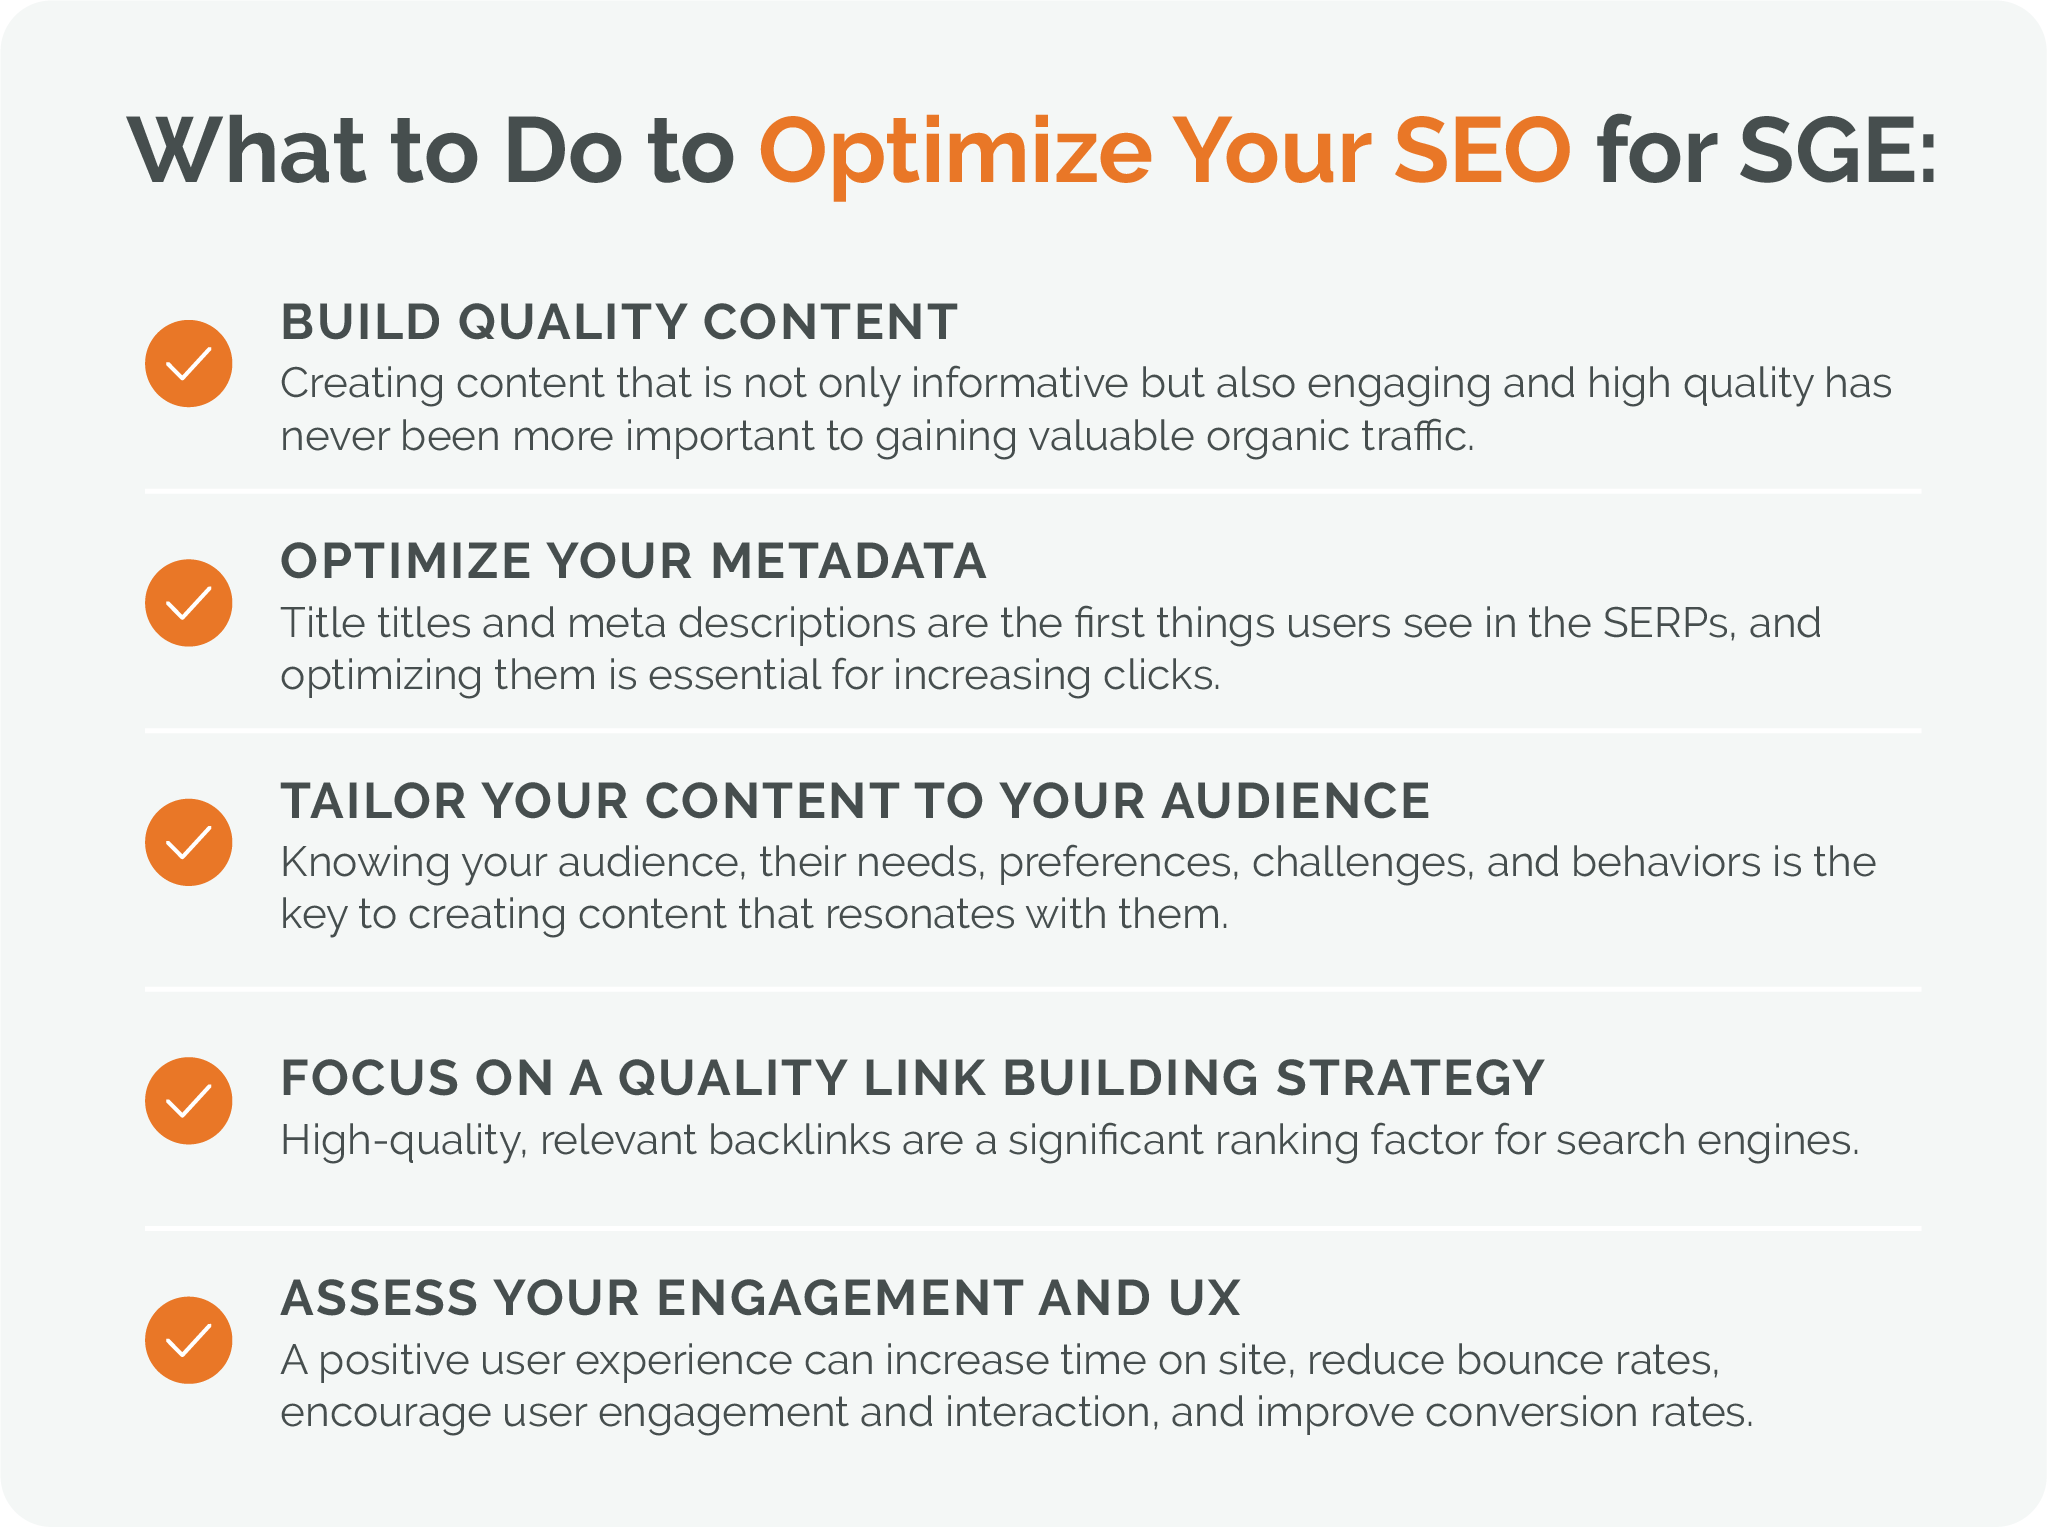 Optimize Your SEO For SGE